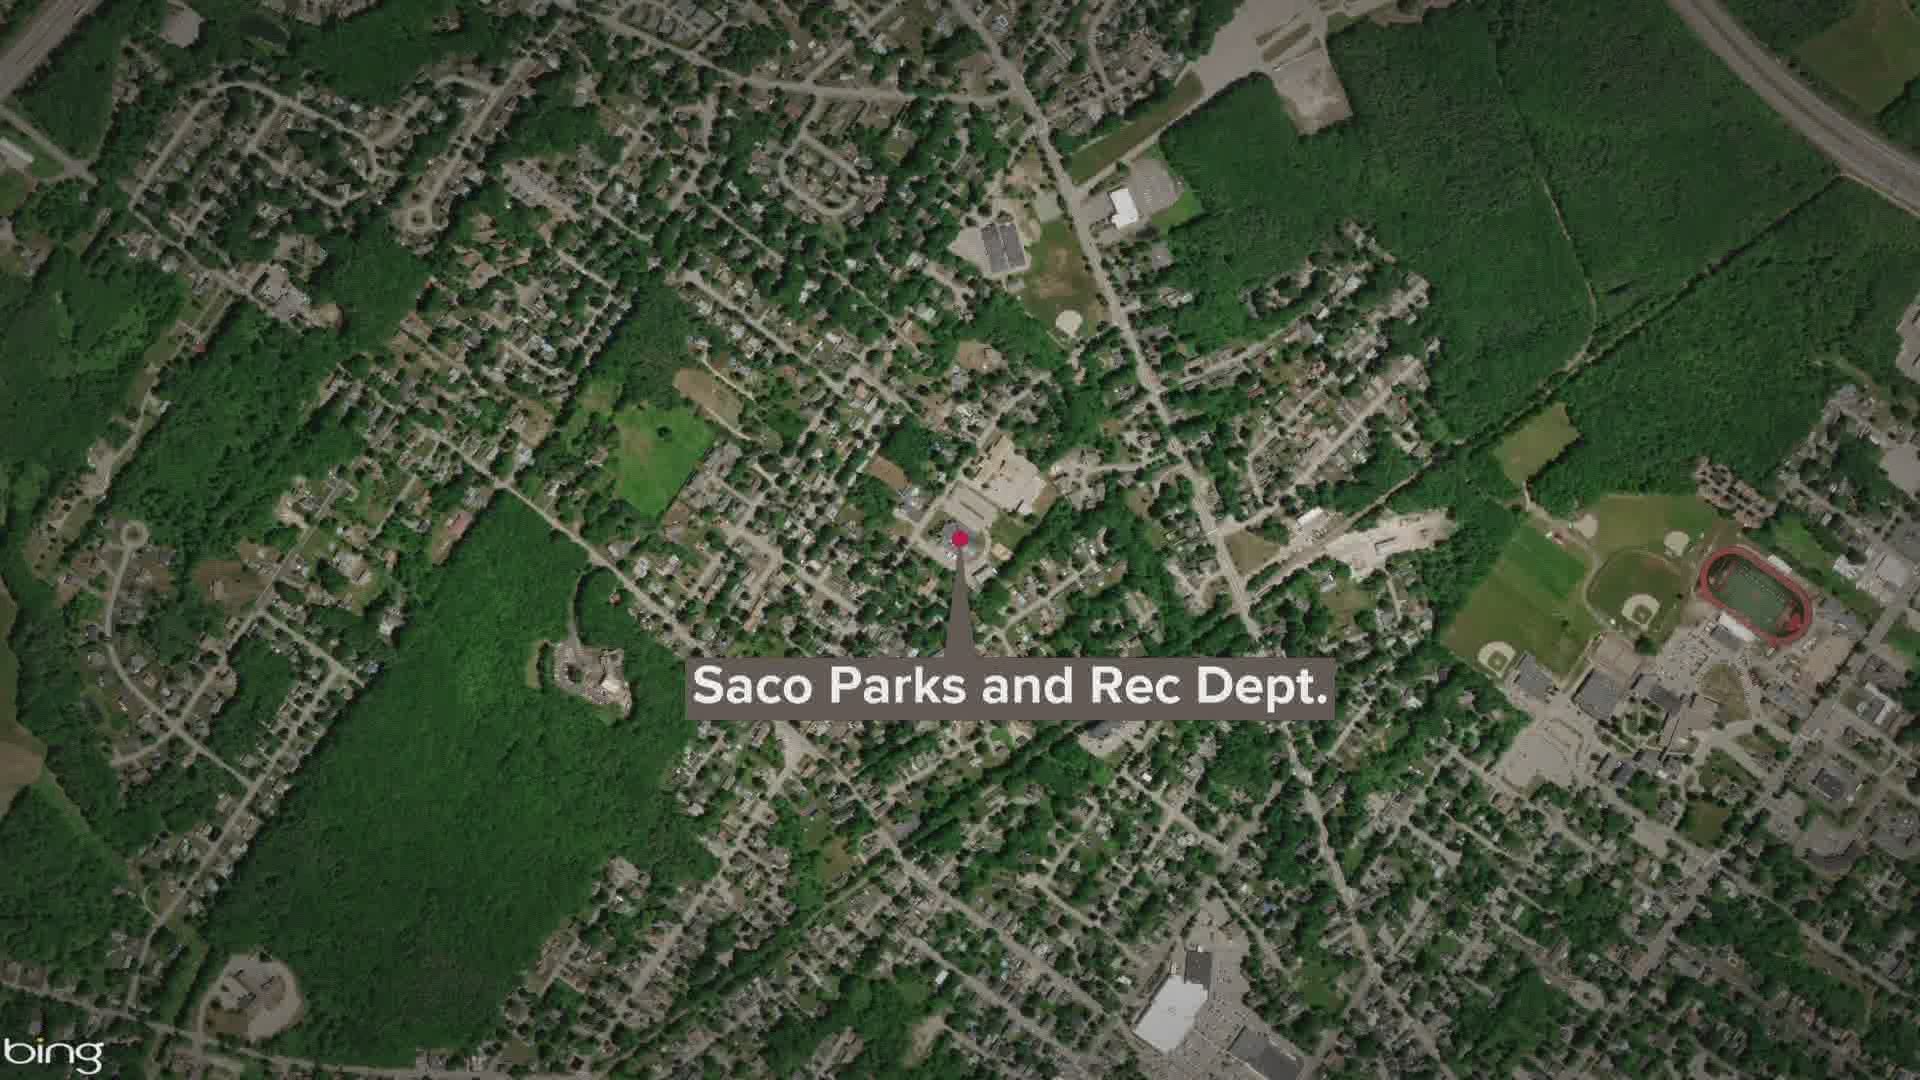 A staff member of the Saco park and rec department has tested presumptive positive and the building will be temporarily closed for cleaning until Monday.